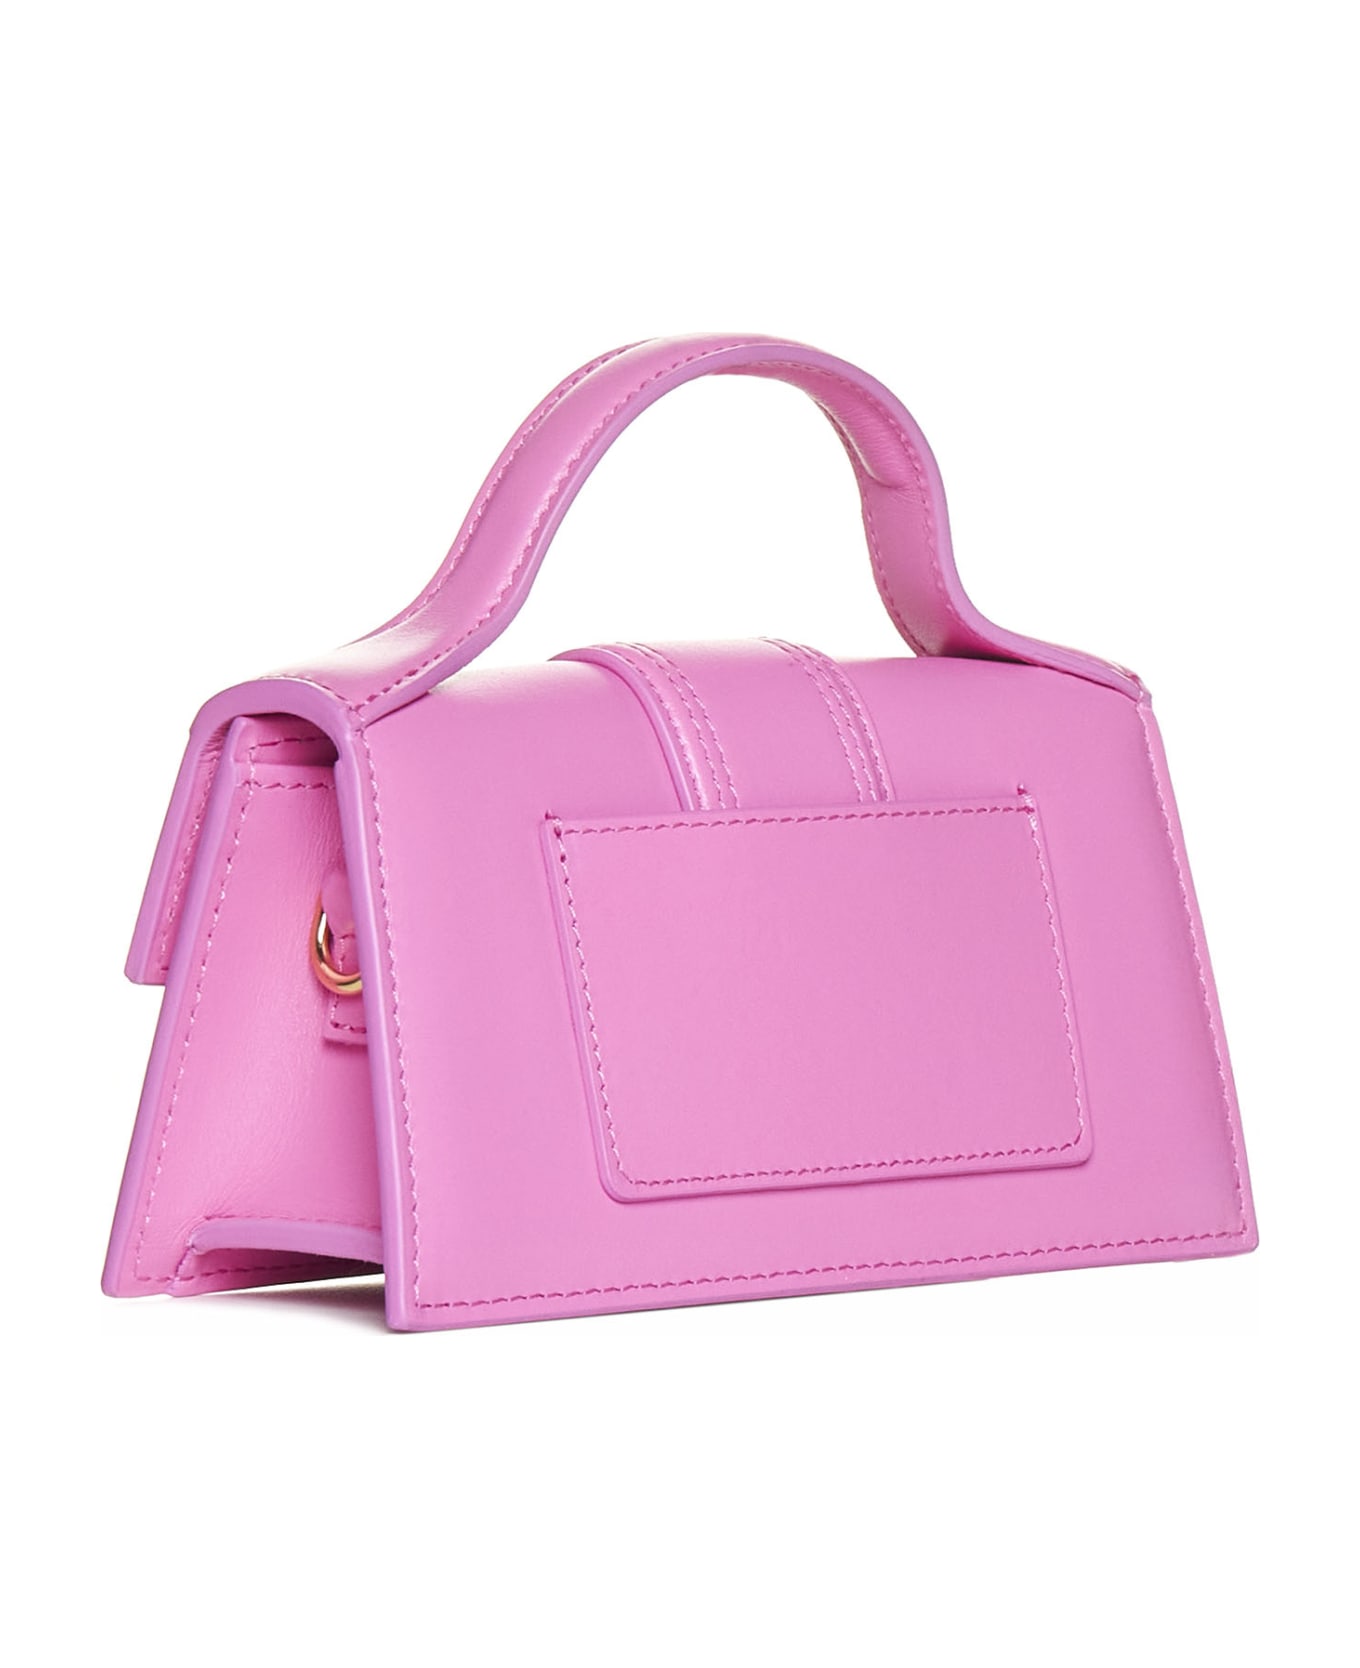 Jacquemus Le Bambino Leather Top Handle Bag - Neon pink トートバッグ